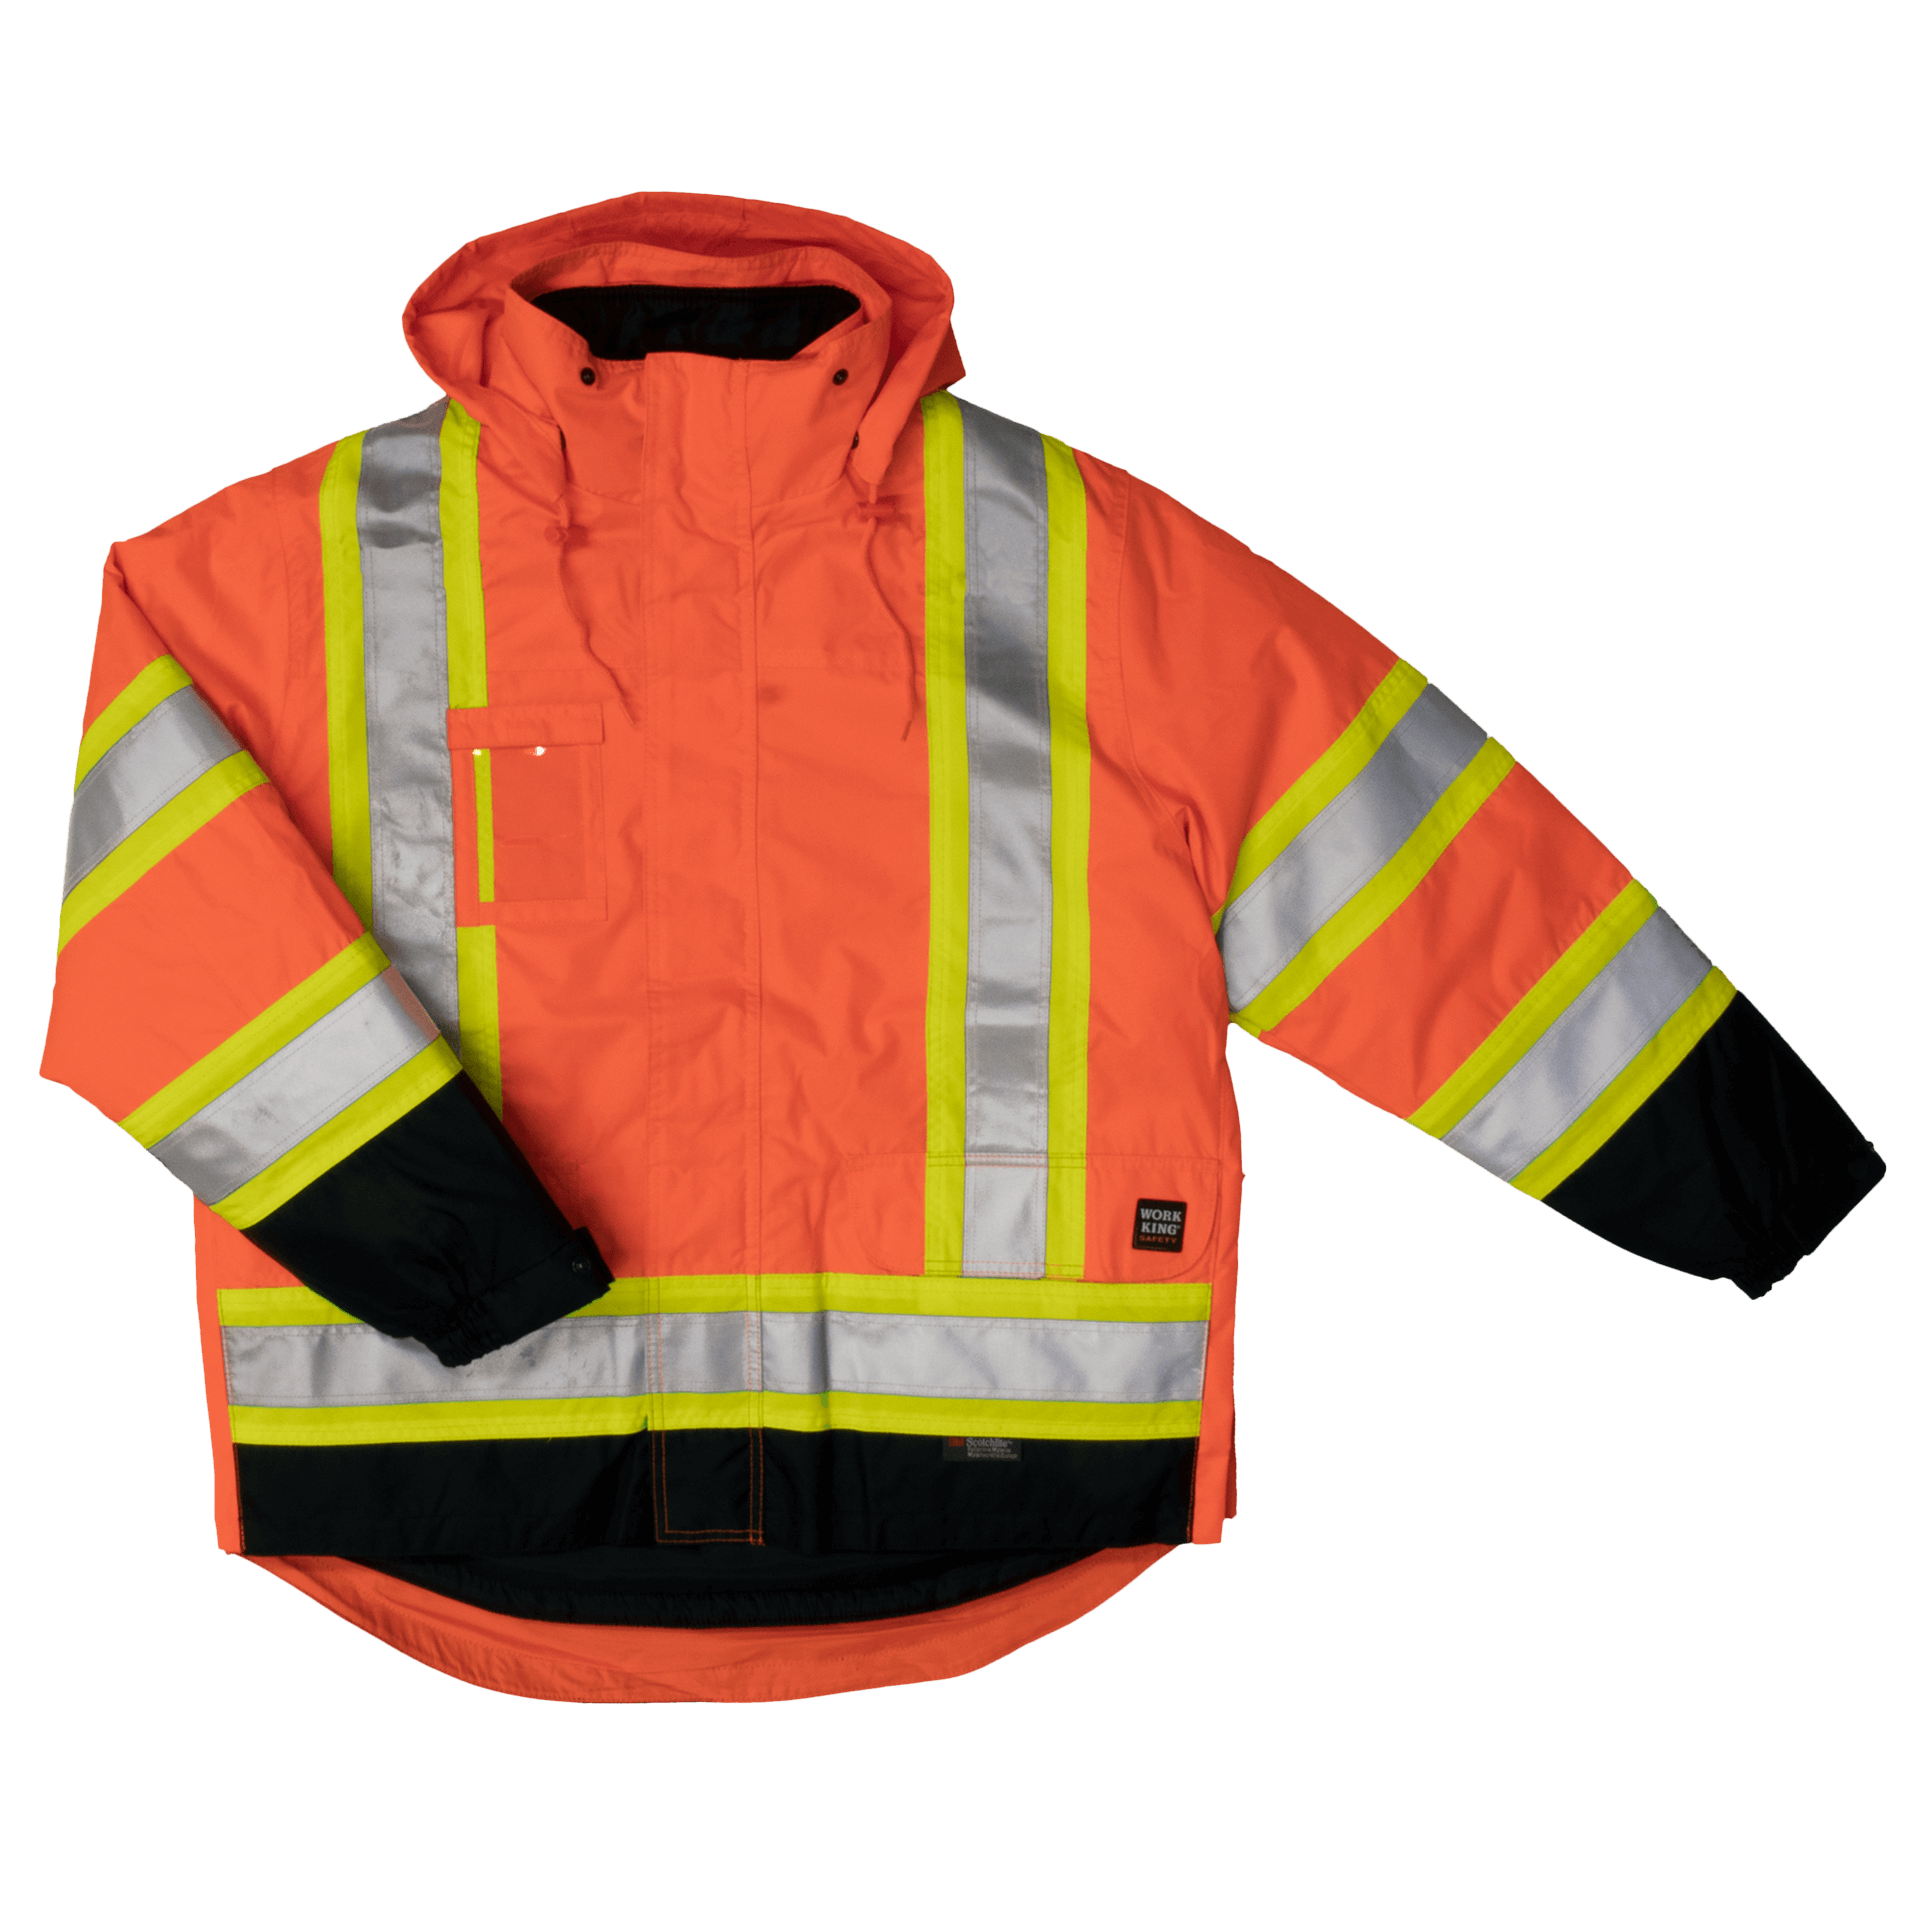 TOUGH DUCK 5-IN-1 SAFETY JACKET - Mucksters Supply Corp